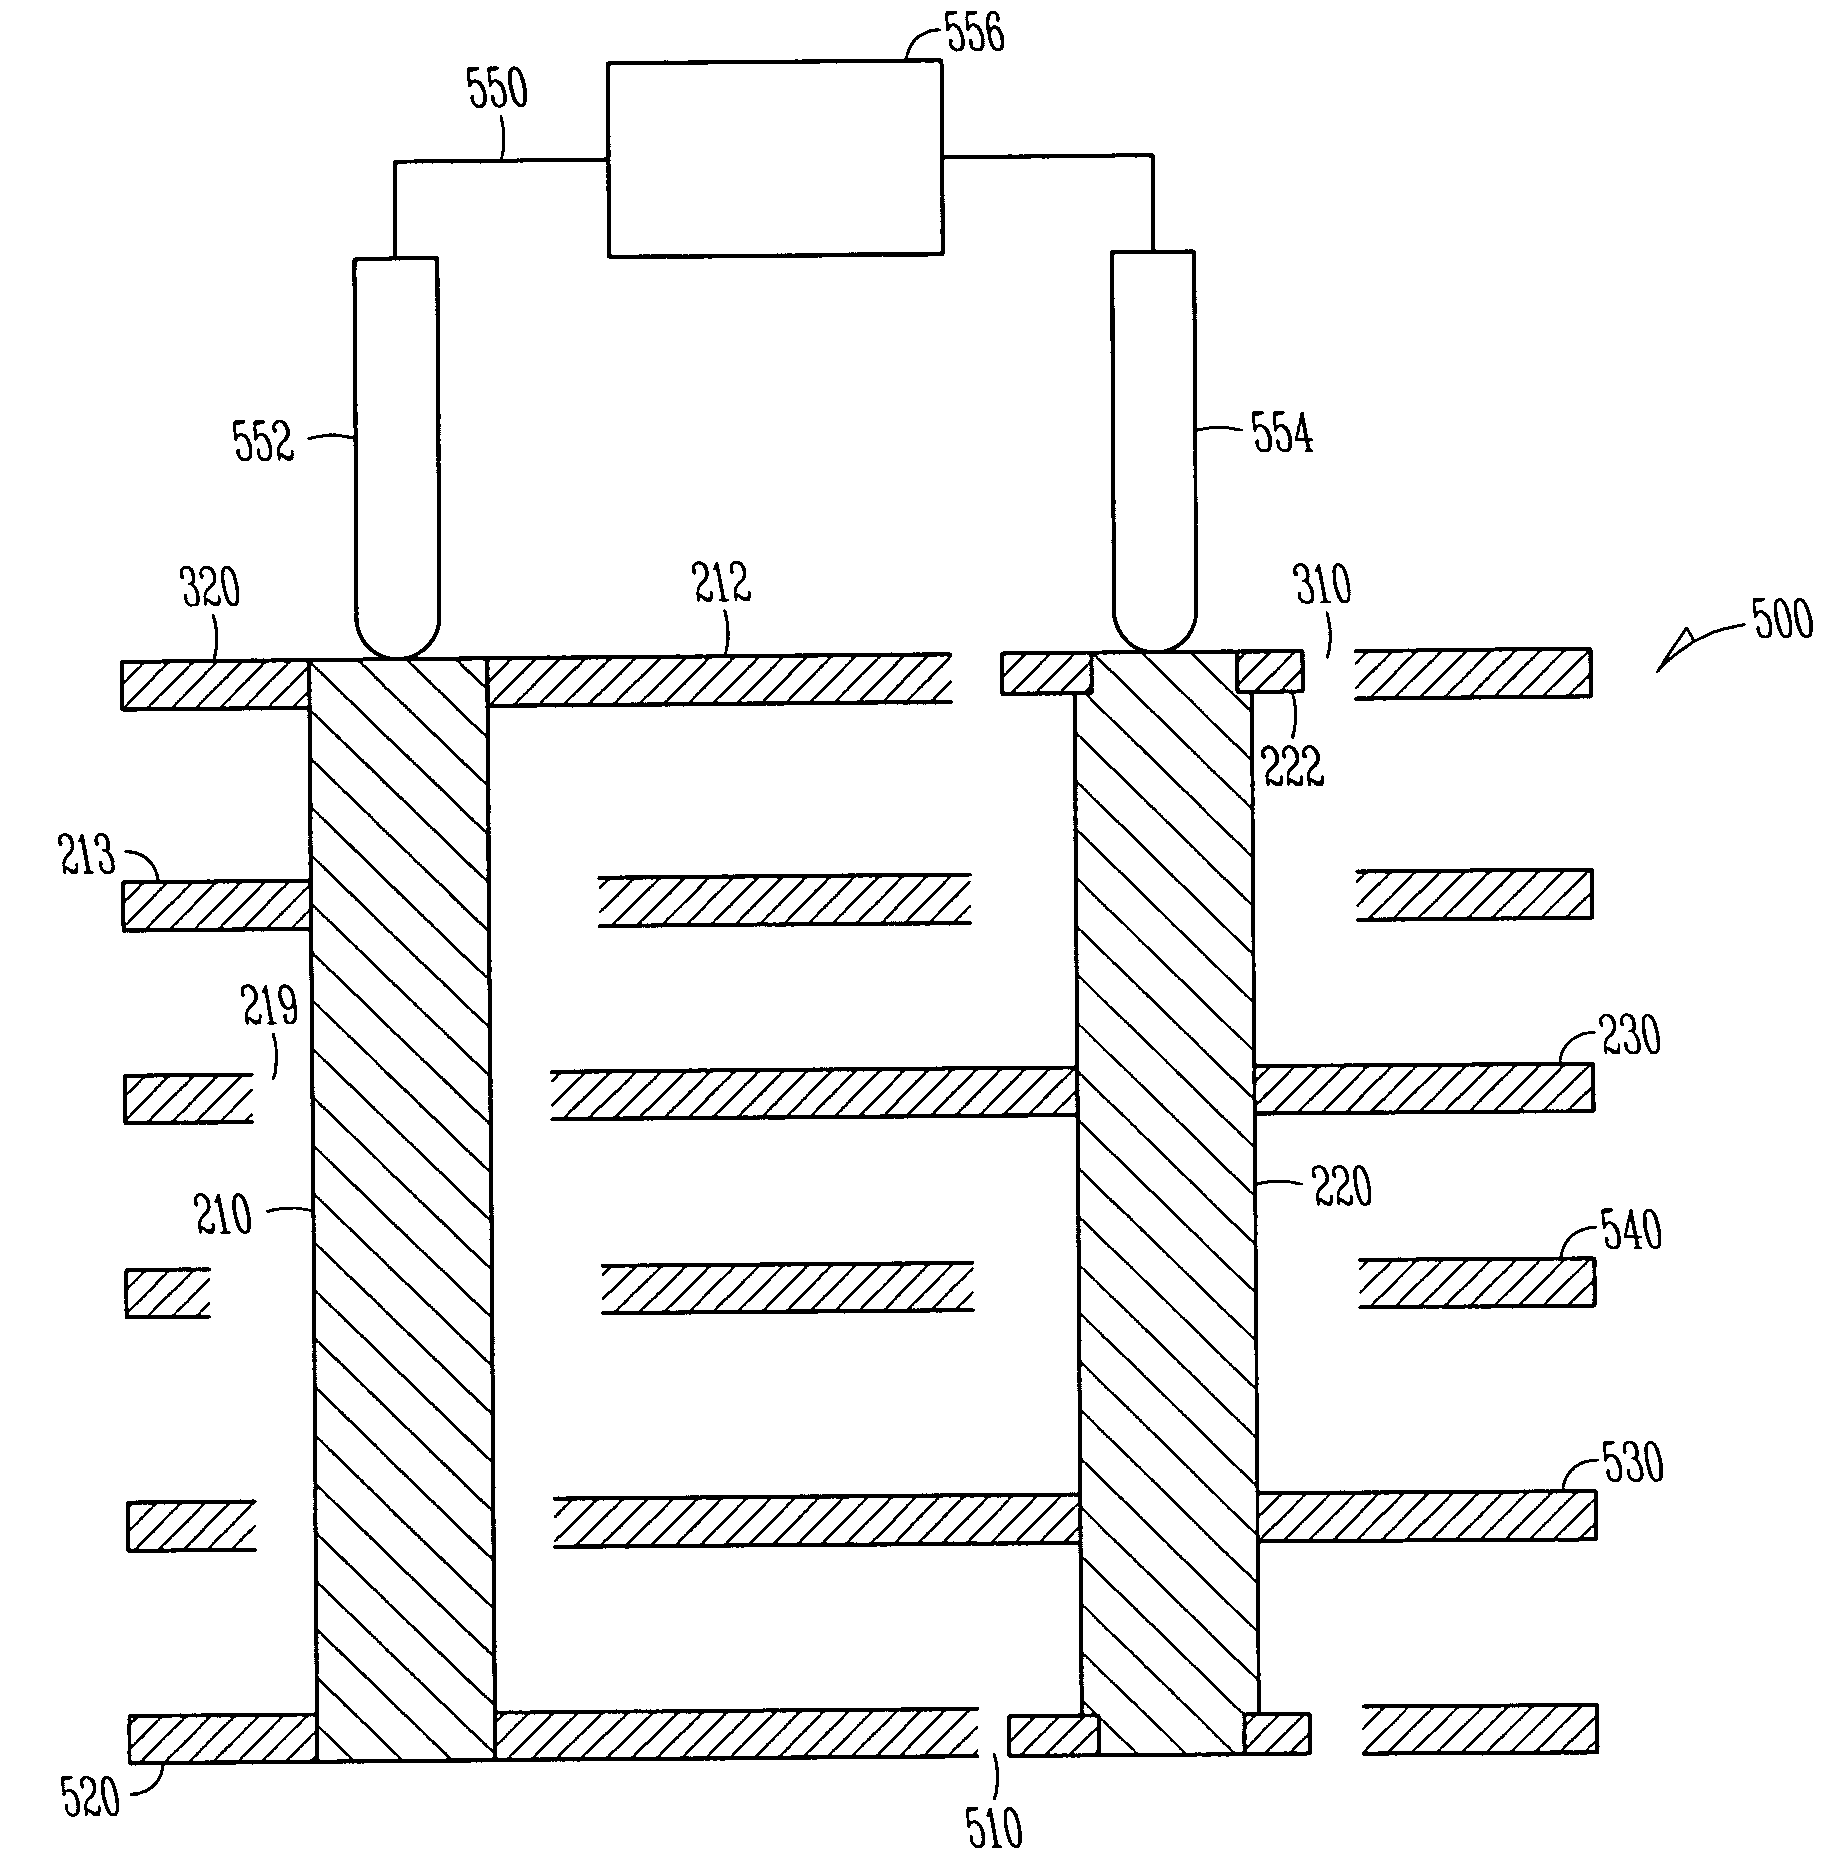 Apparatus for providing an integrated printed circuit board registration coupon